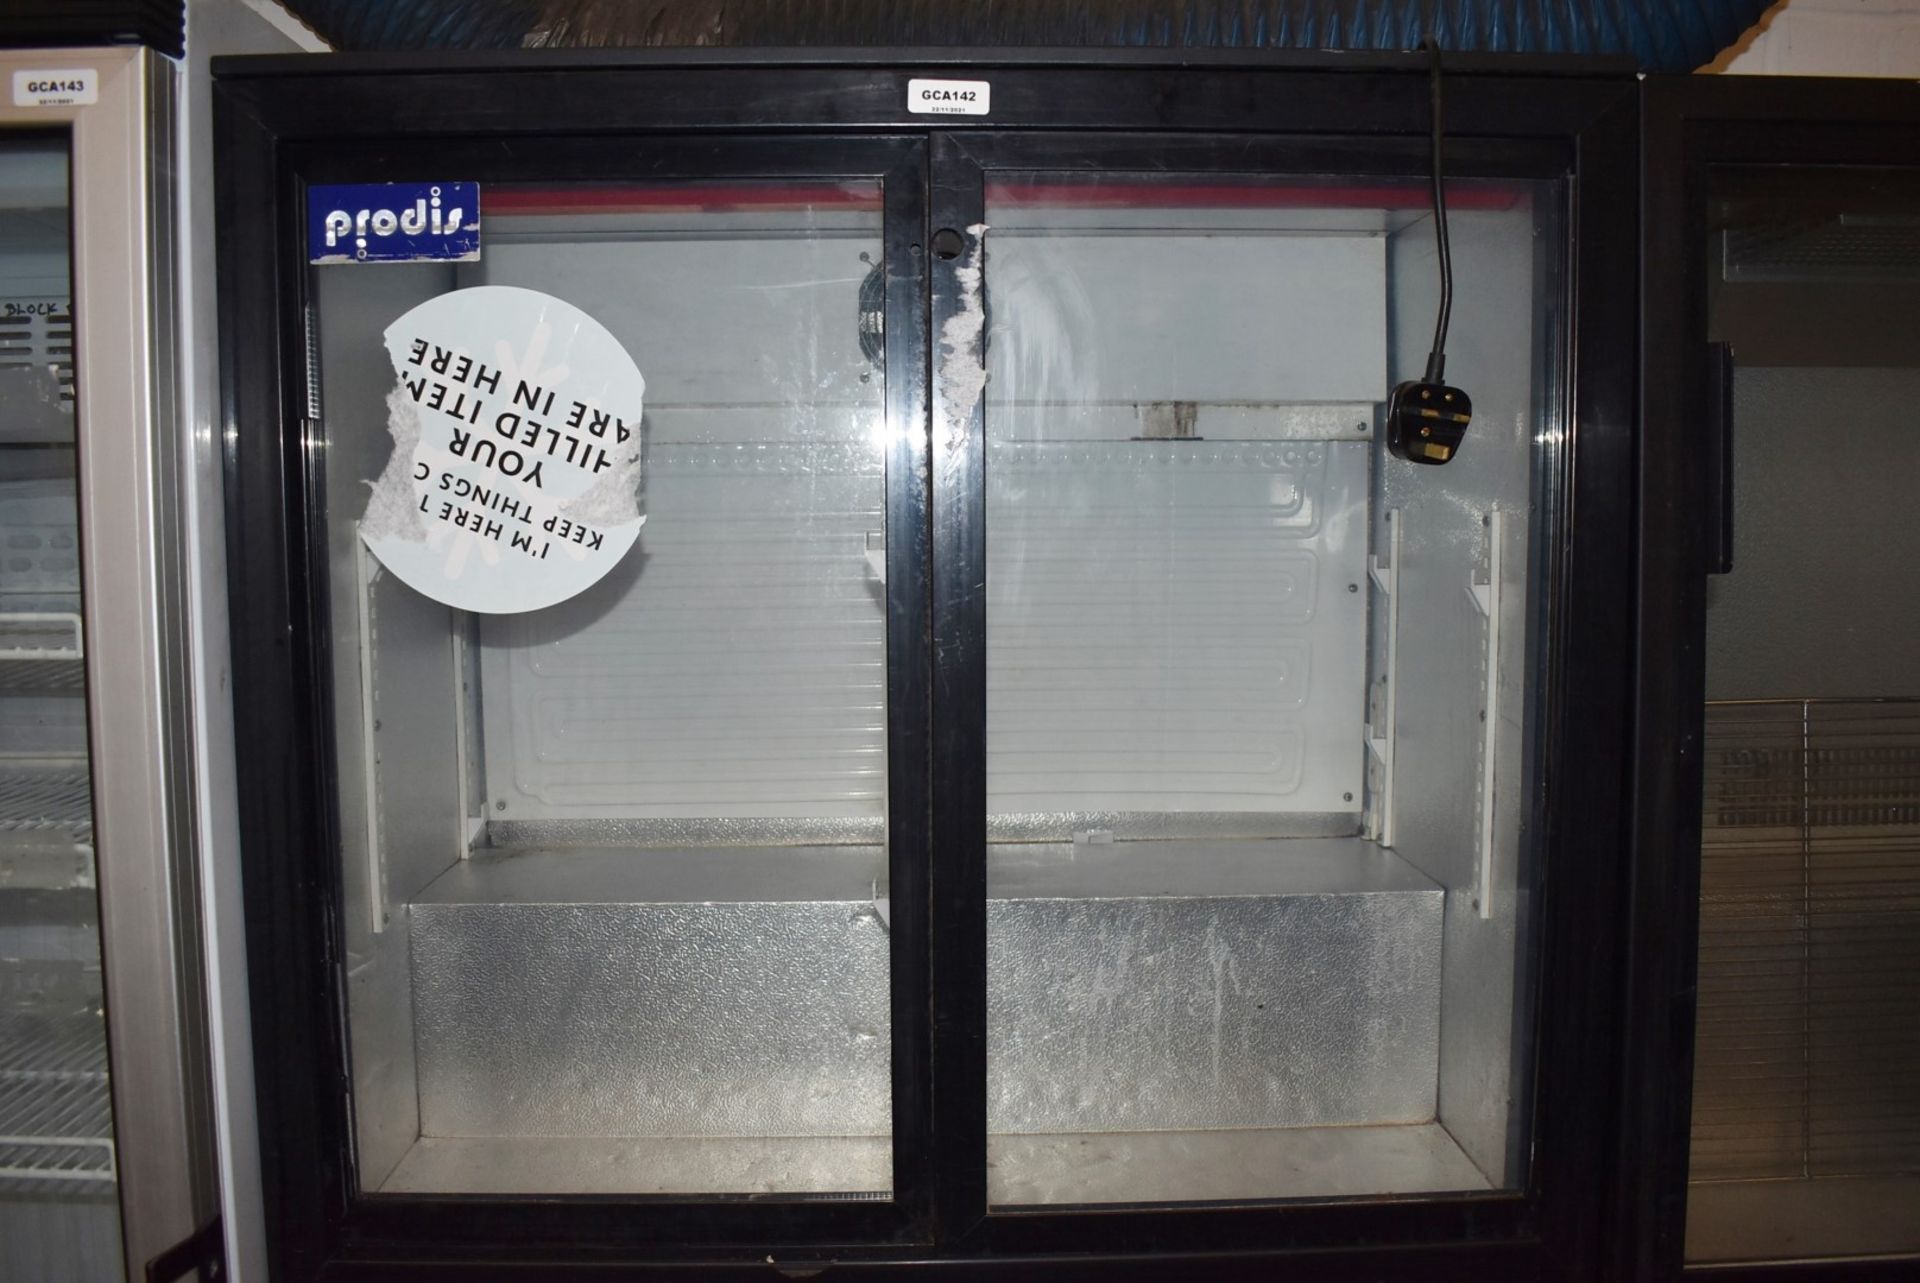 2 x Backbar Double Door Bottle Coolers - Ref: GCA142 WH5 - CL011 - Location: Altrincham WA14These - Image 6 of 6